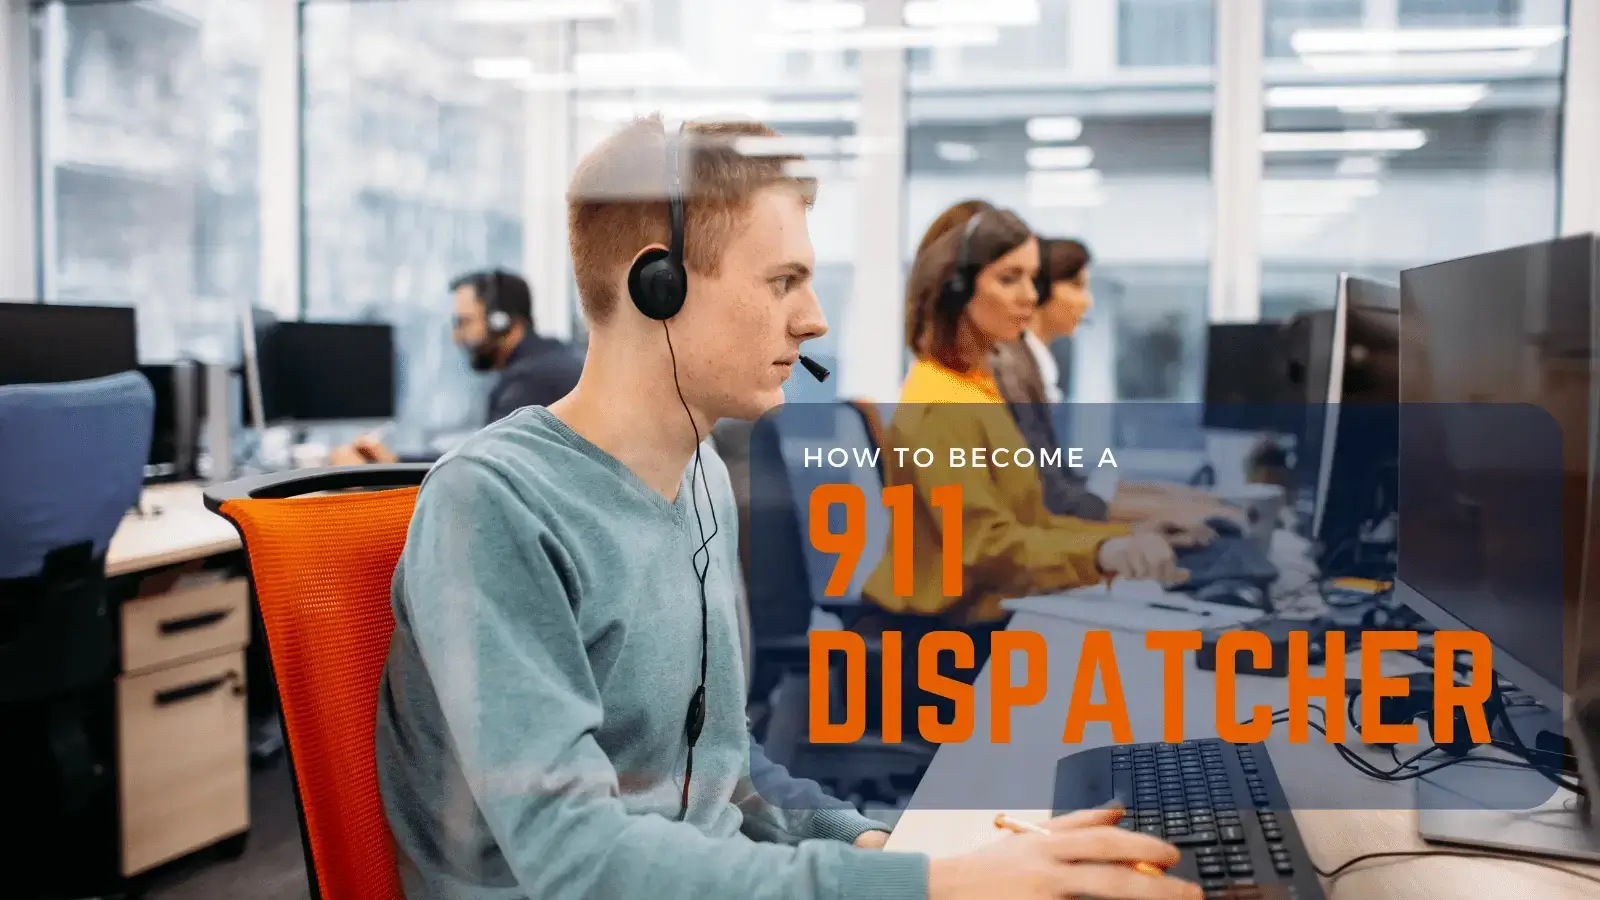 How-to-Become-a-911-dispatcher